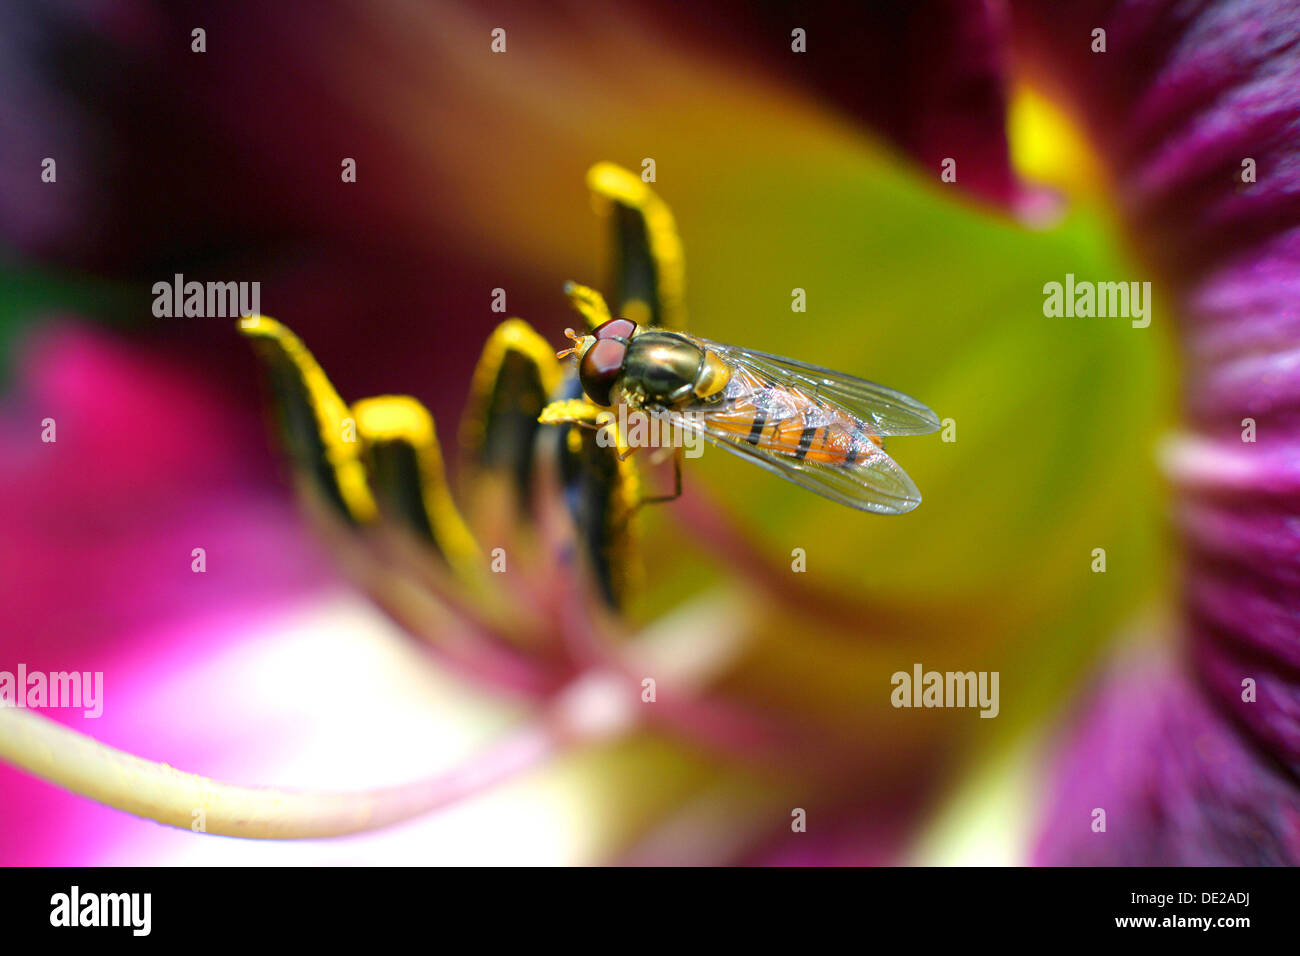 Hoverfly (Syrphus ribesii), on a pistil of a lily Stock Photo